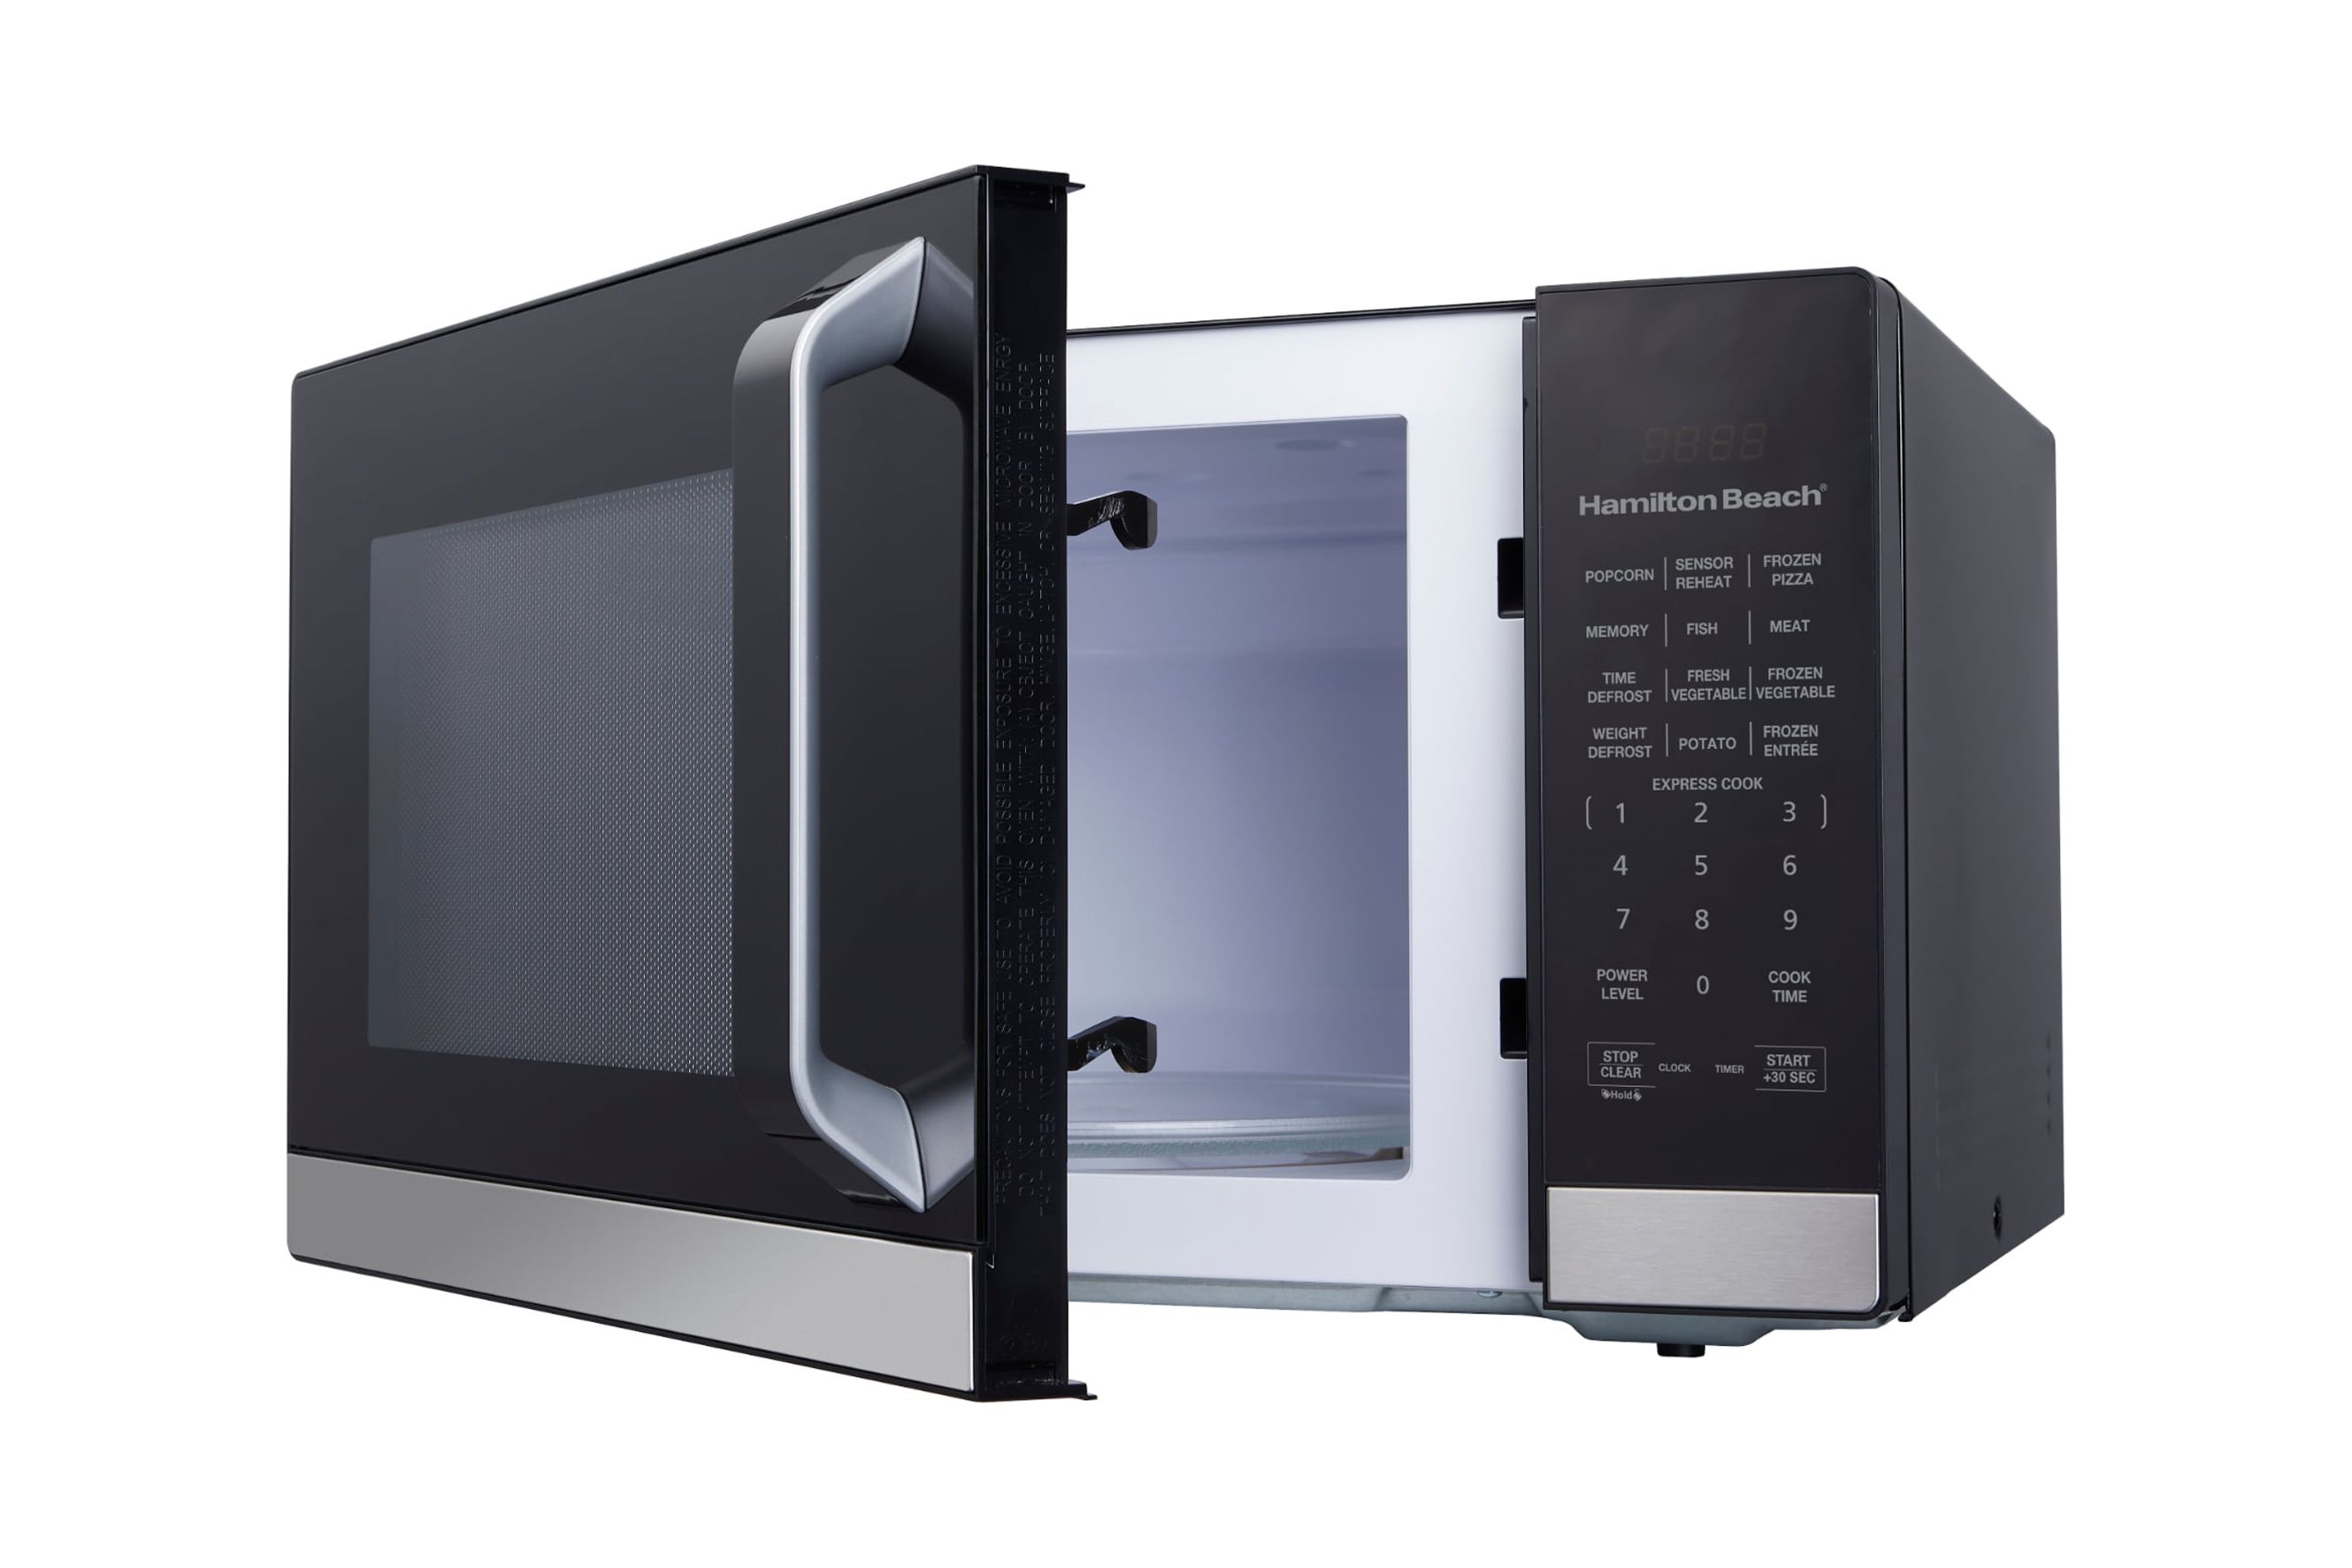 Hamilton Beach 1.4 Cu.ft. Microwave Oven, Stainless Steel, with Sensor - image 4 of 6